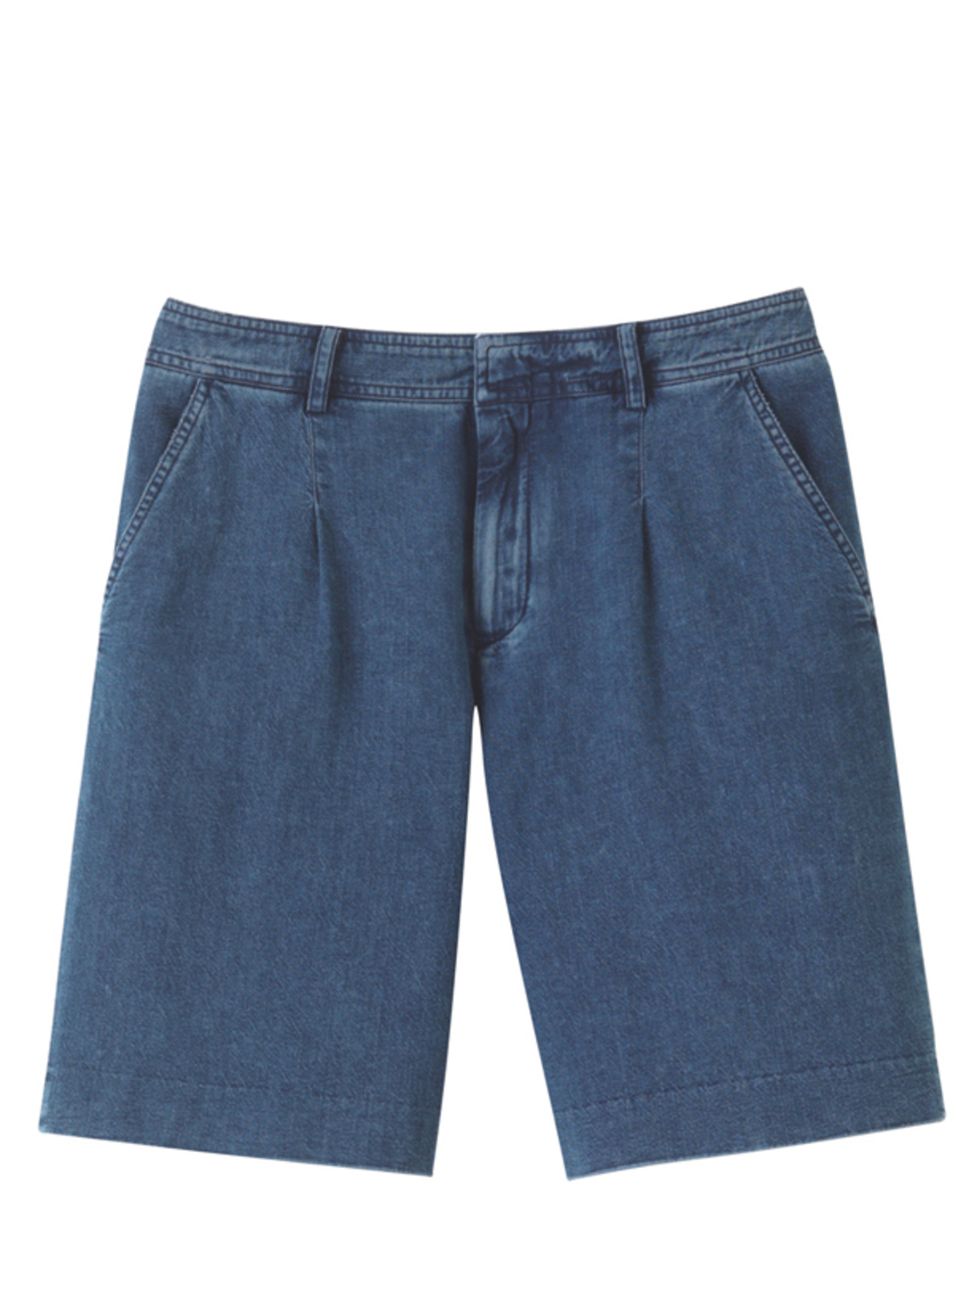 <p>A.P.C. washed denim shorts, £125, for stockists call 0207 729 7727</p>